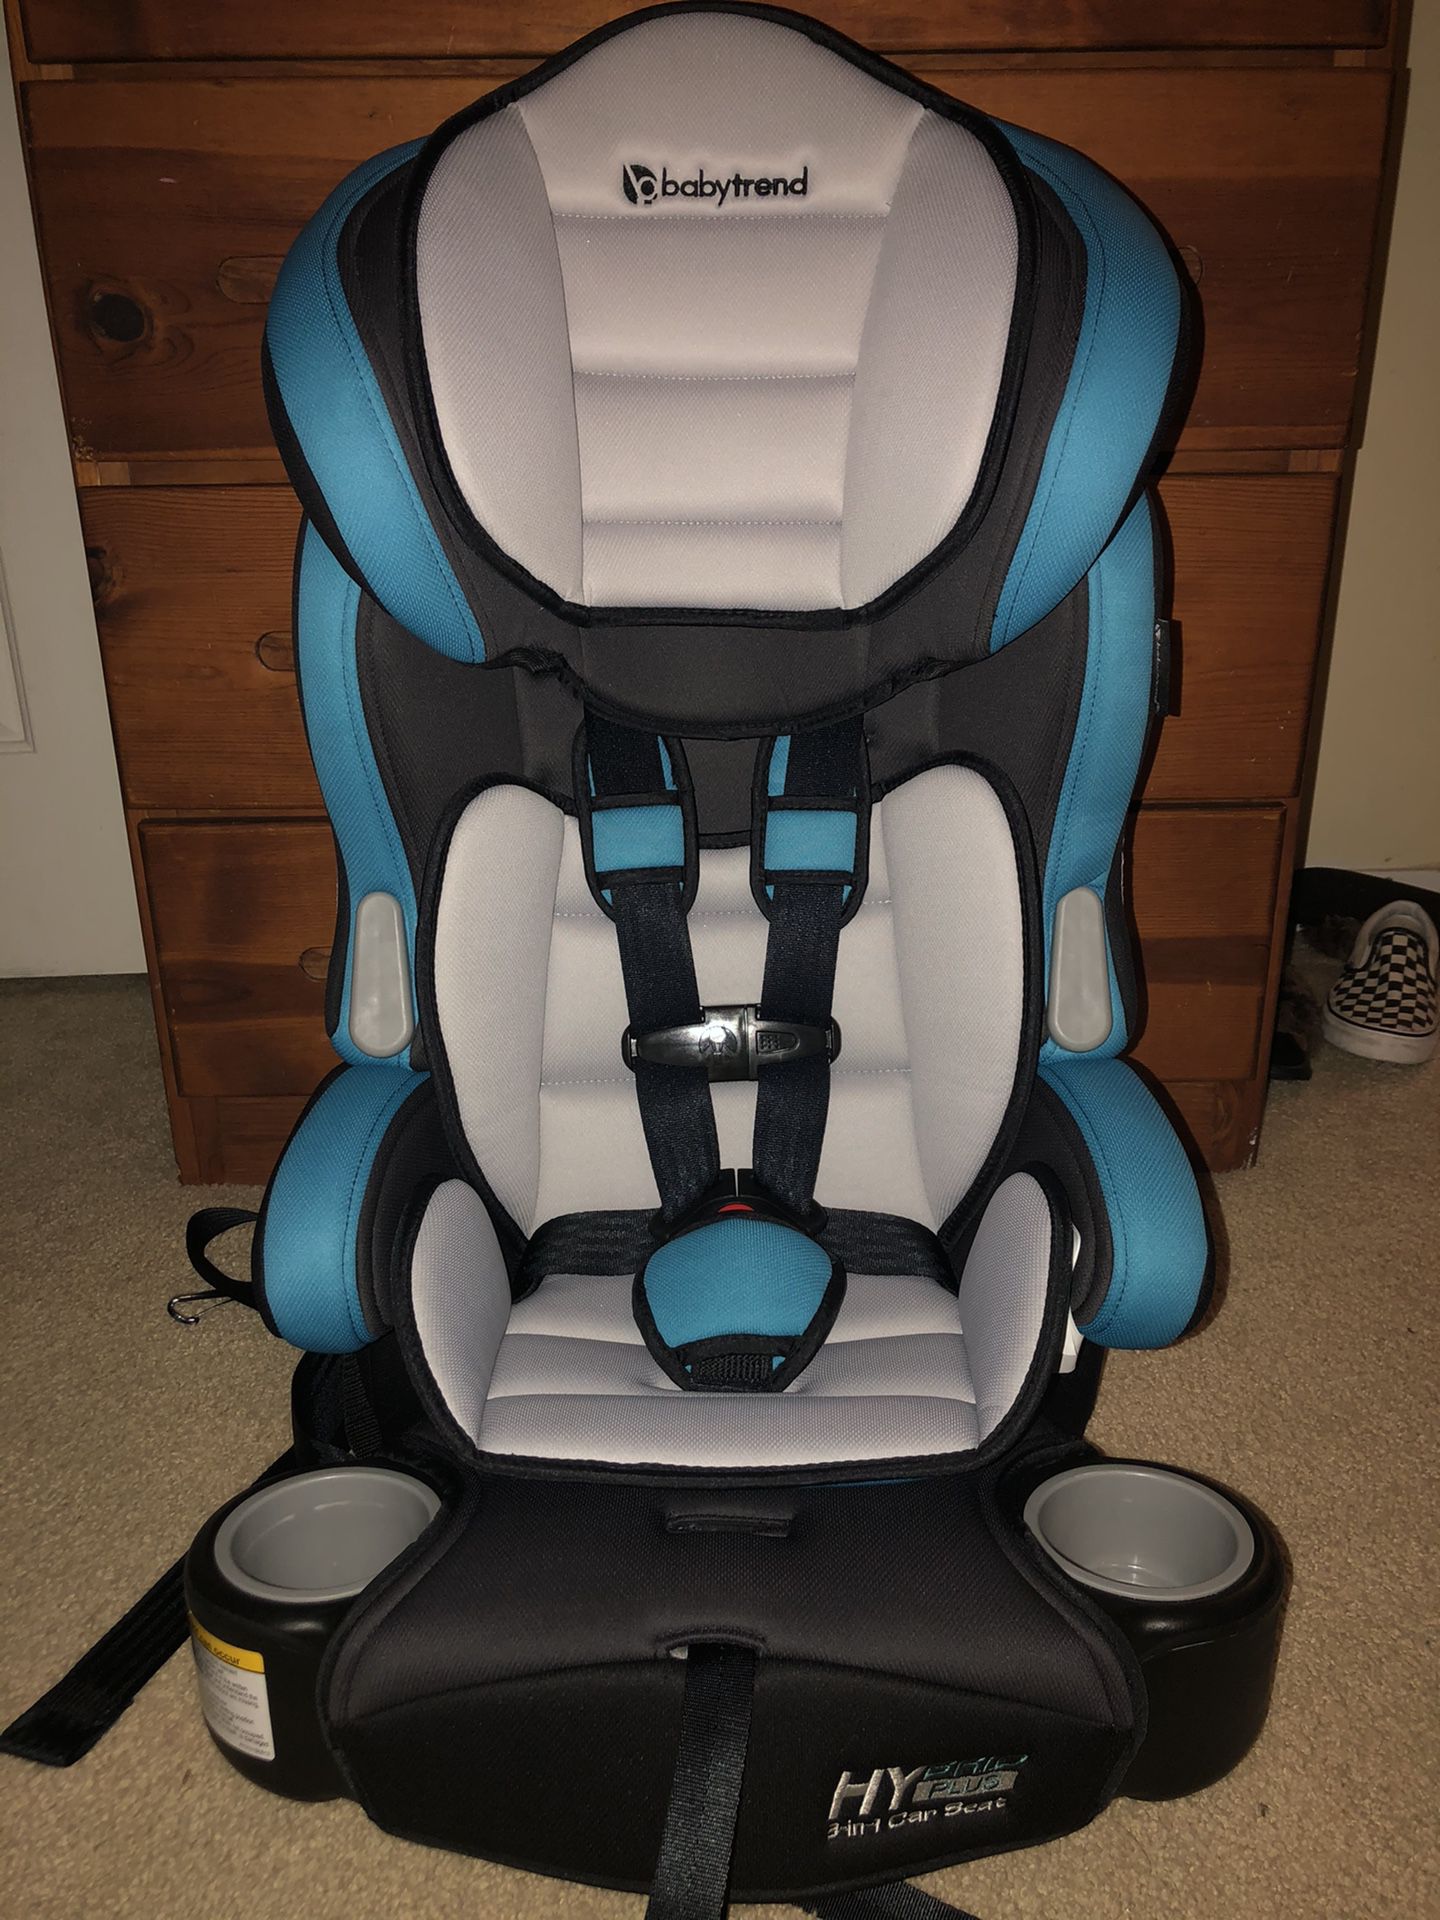 Baby trend 3 in 1 car seat